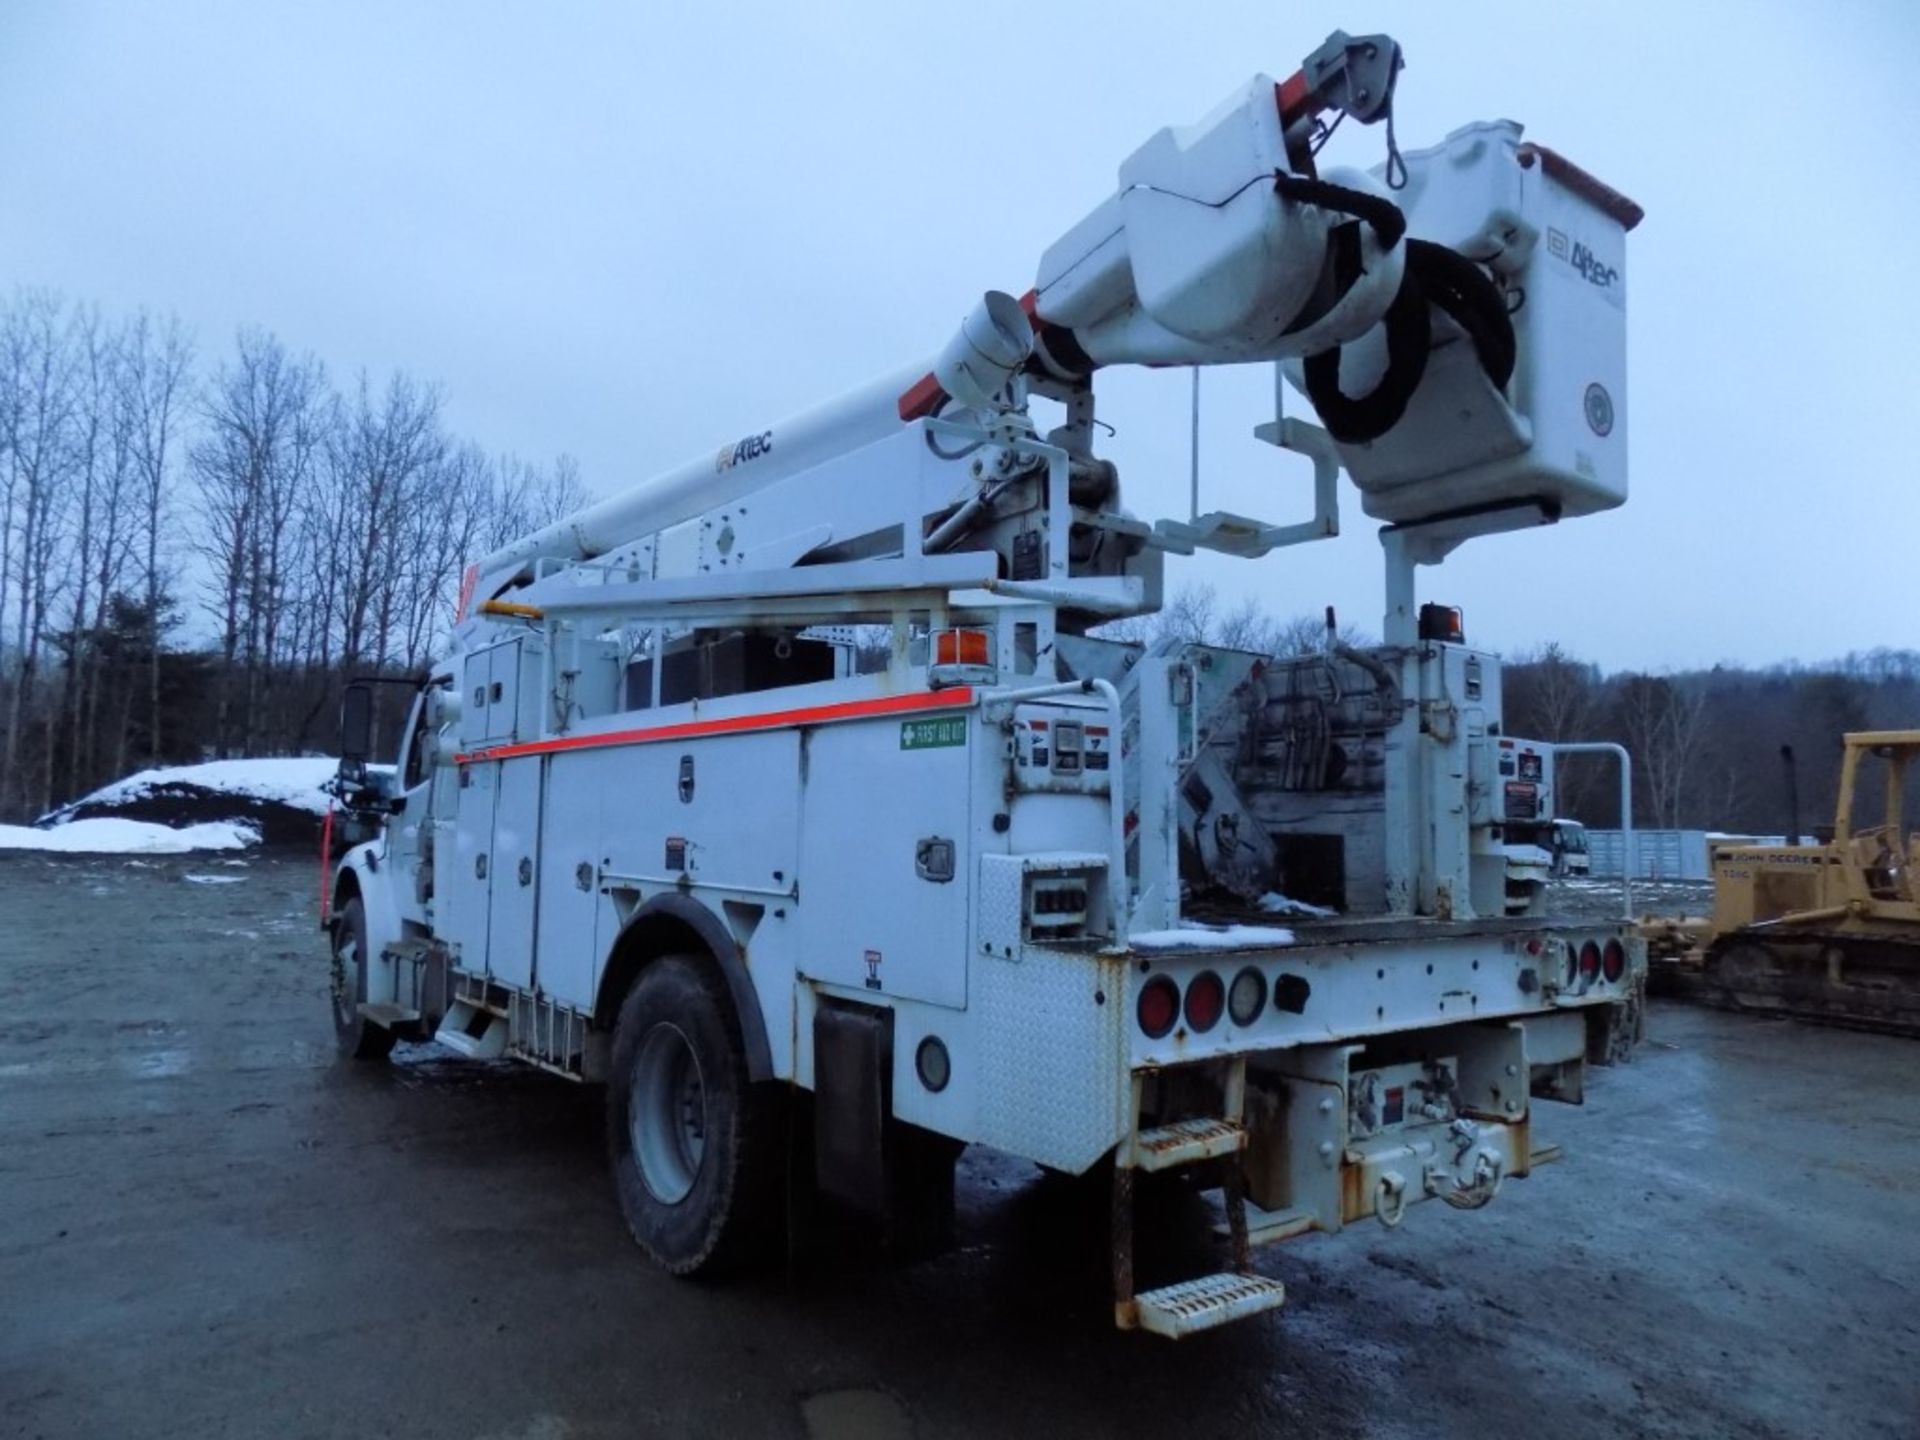 2012 Freightliner Business Class M2 Bucket Truck, Altec 55' Boom on Body with Down Riggers, 2 WD, - Image 2 of 9